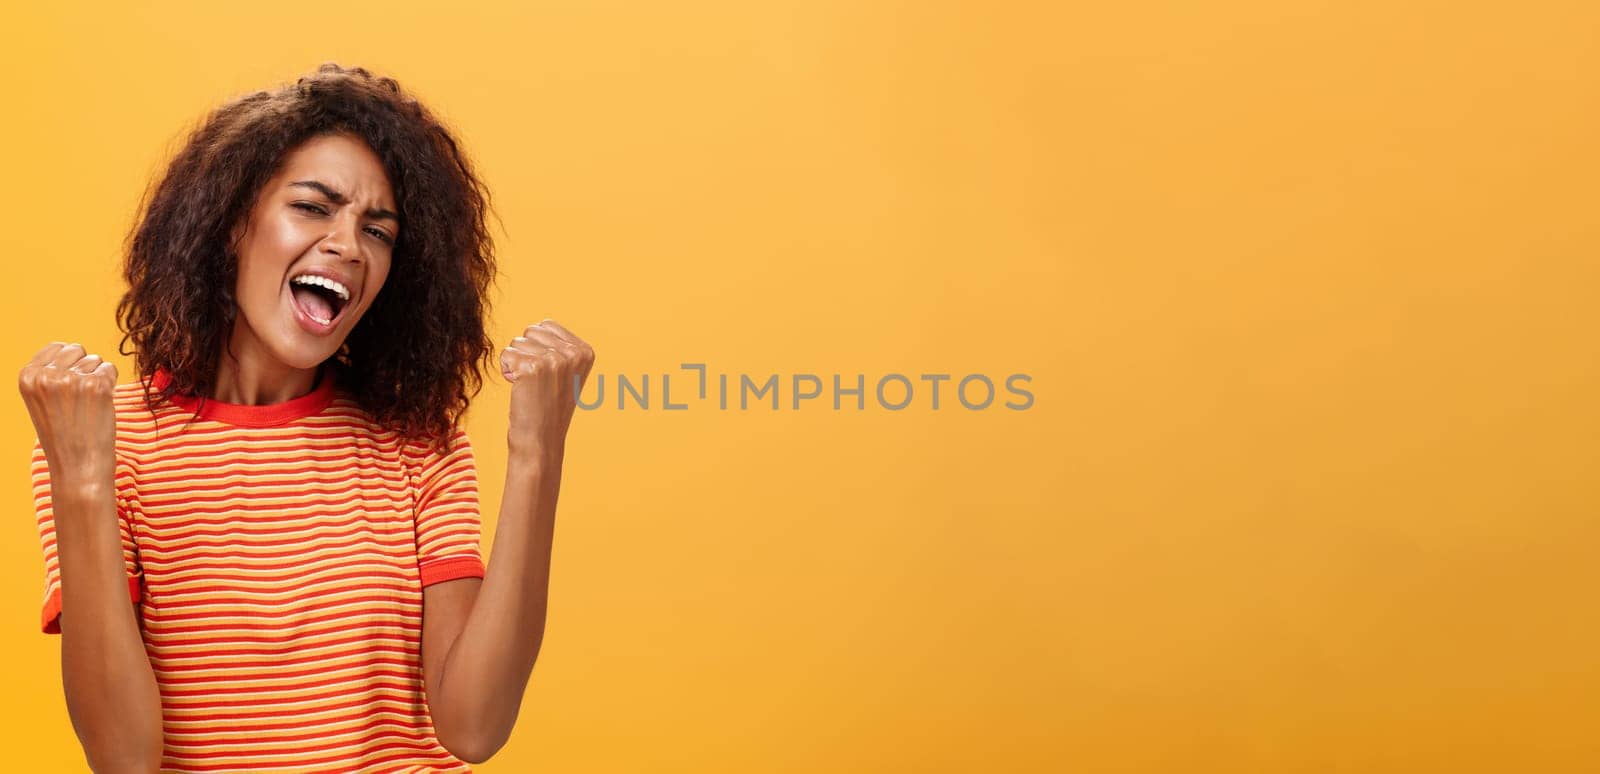 Cheerful delighted and enthusiastic african american woman with afro hairstyle clenching raised fists yelling yes from triumph and joy of success standing satisfied of victory over orange wall. Lifestyle.